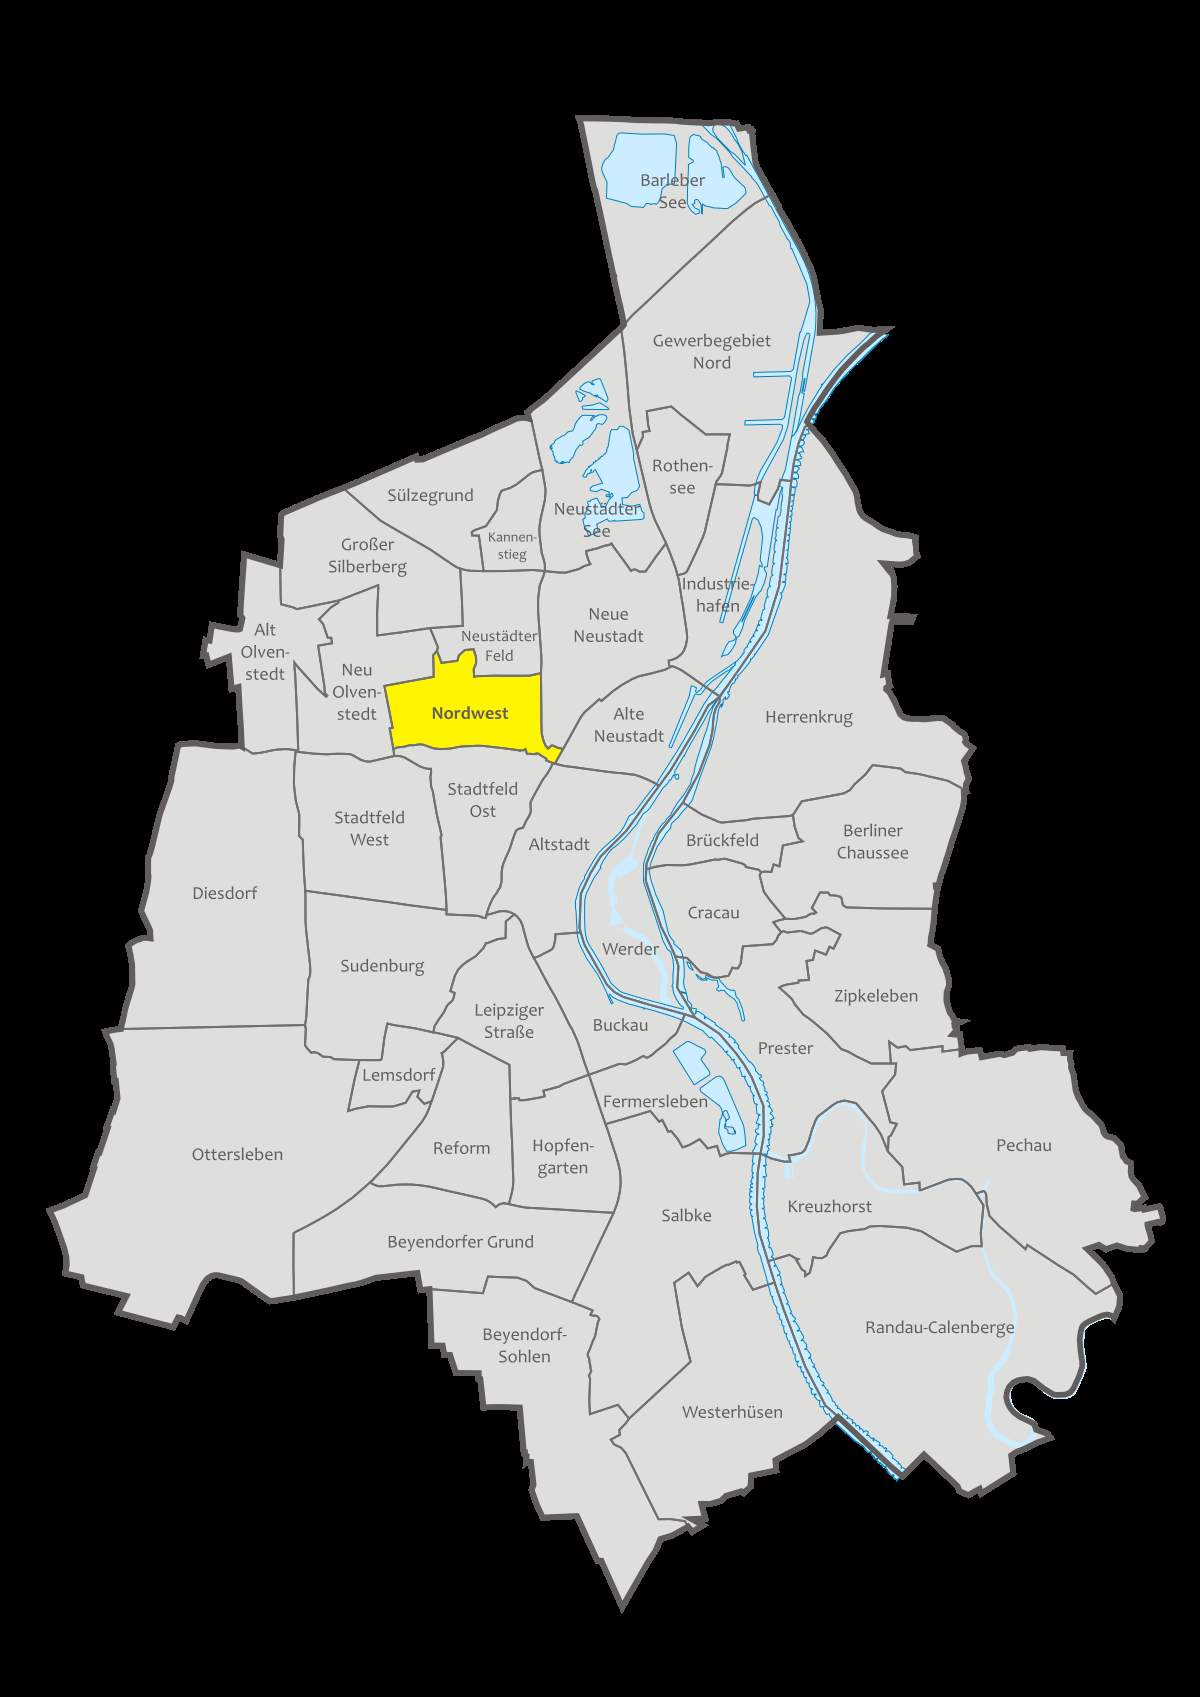 1200px Magdeburg administrative districts Nordwest locationg